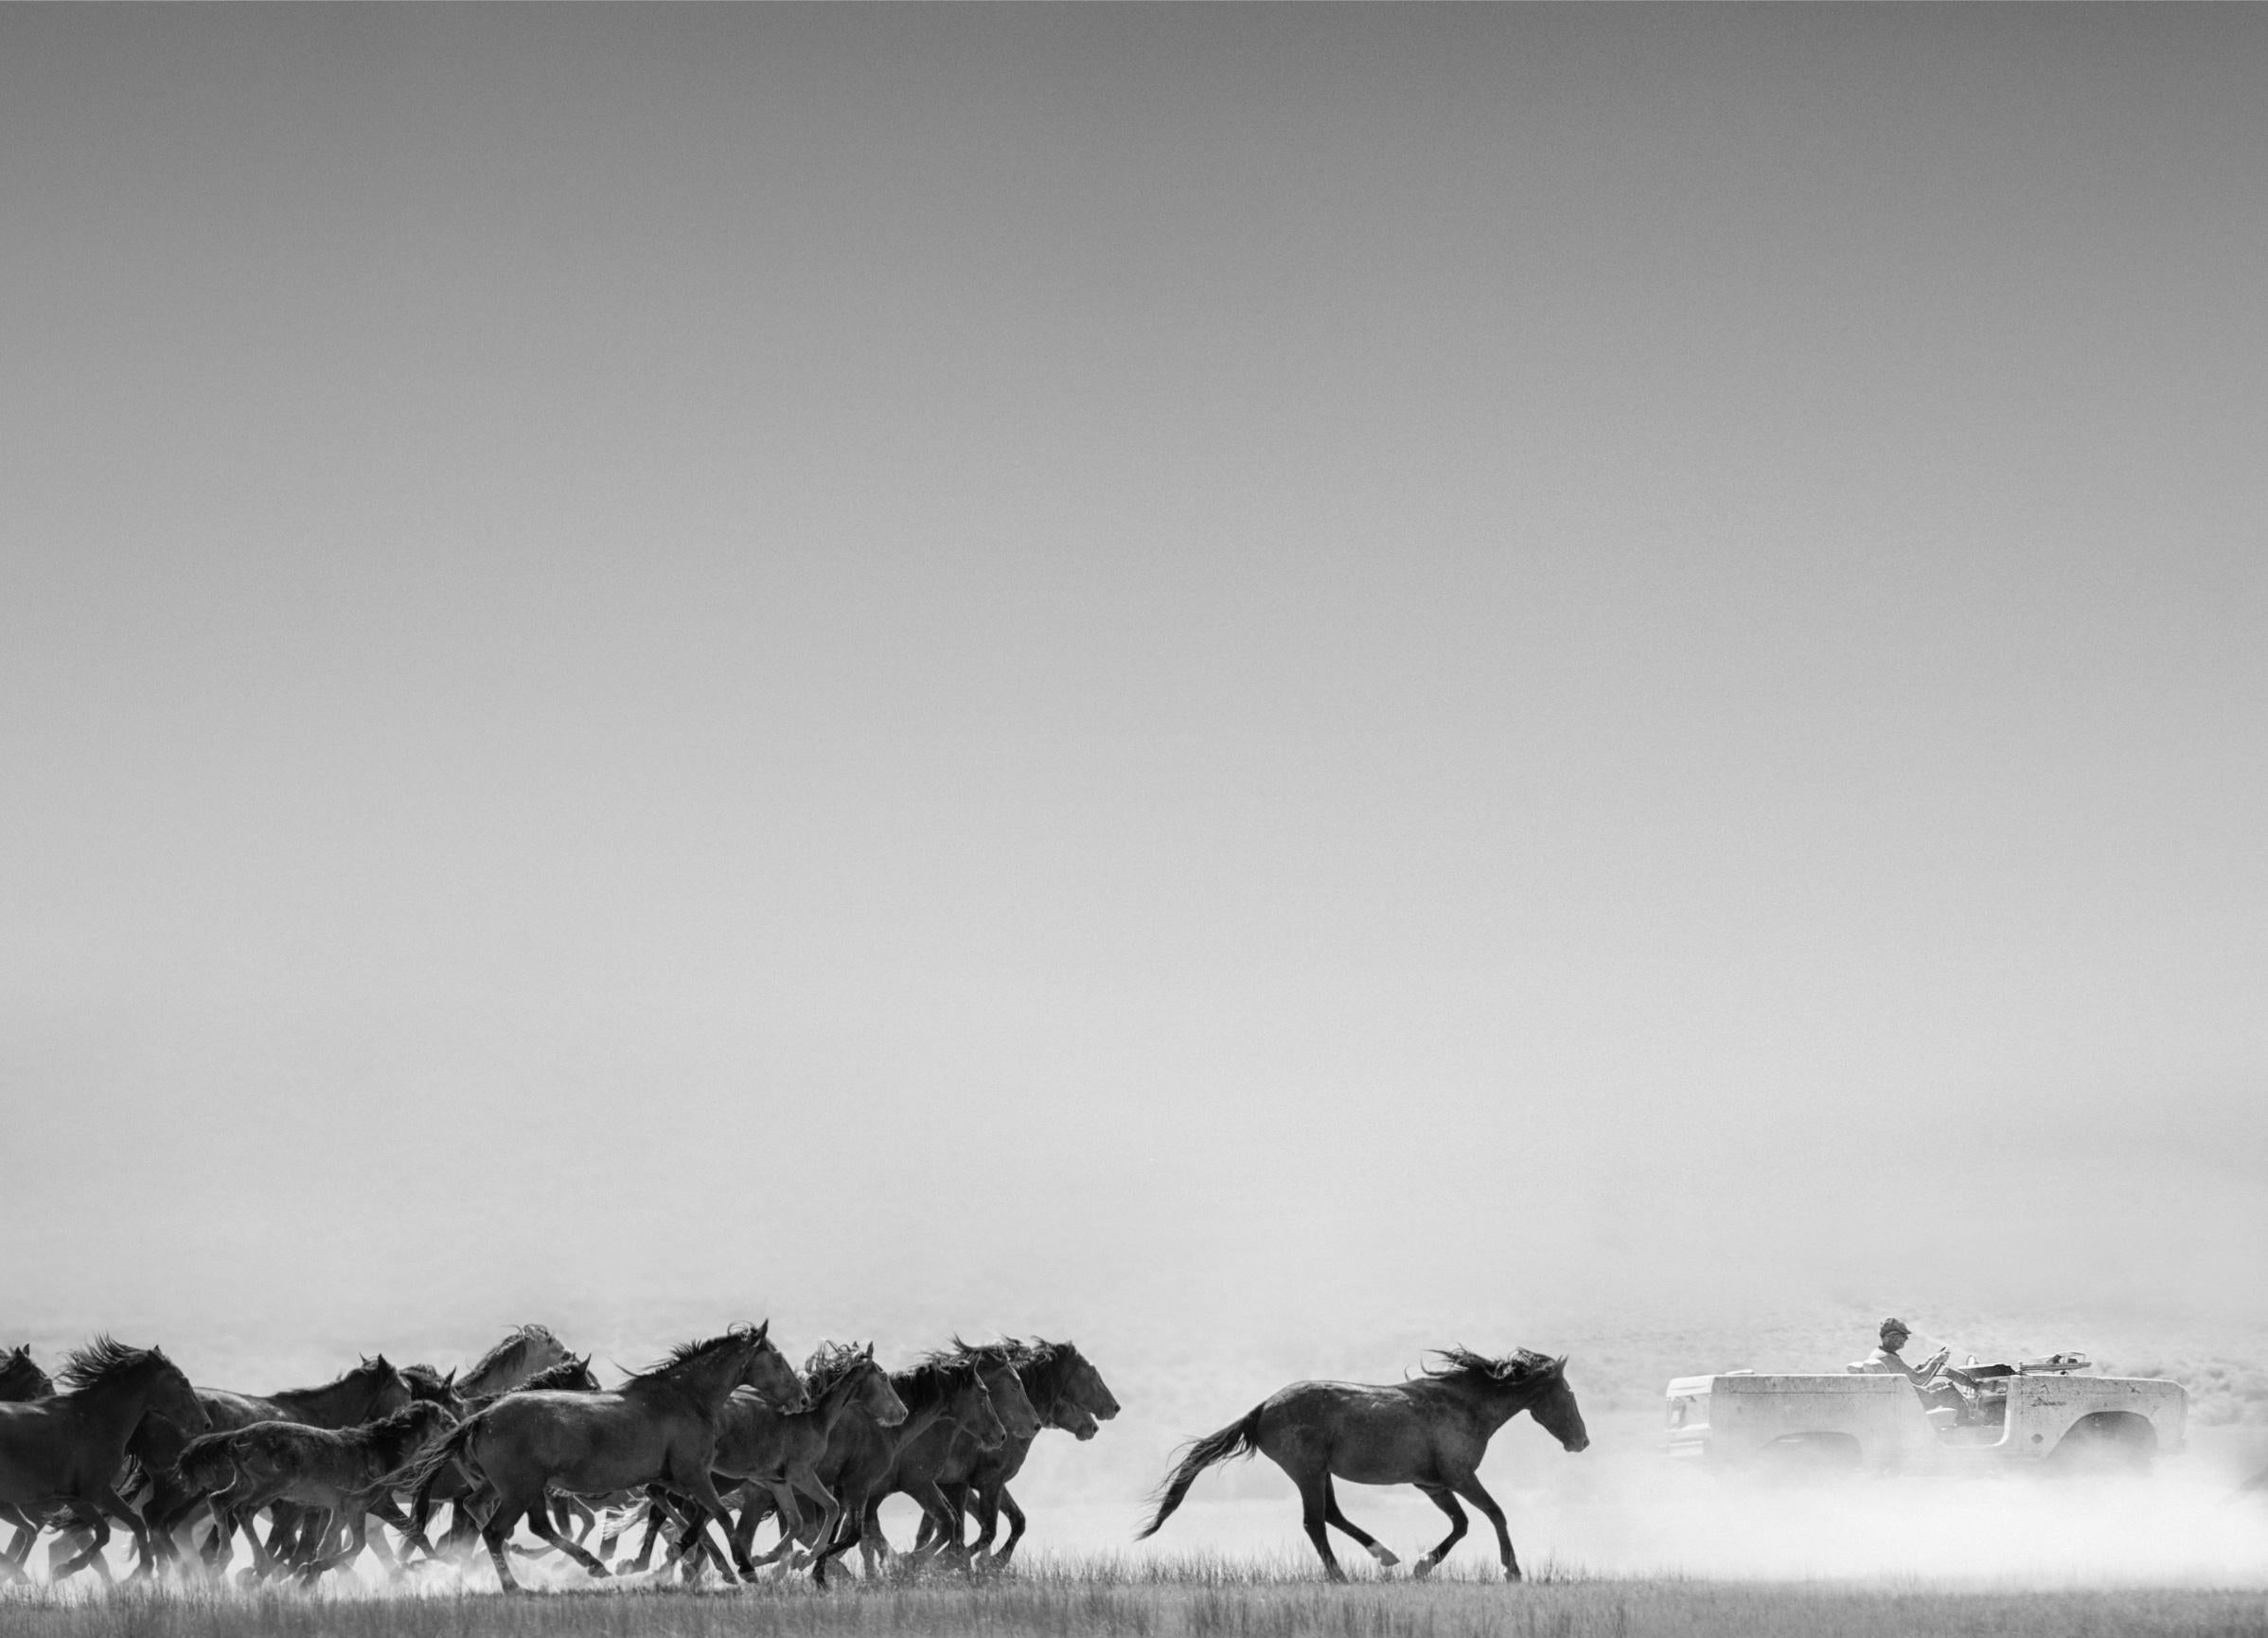 Shane Russeck Animal Print - 40x60 AMERICAN HORSE POWER B&W Photography Wild Horses Mustangs FORD BRONCO 